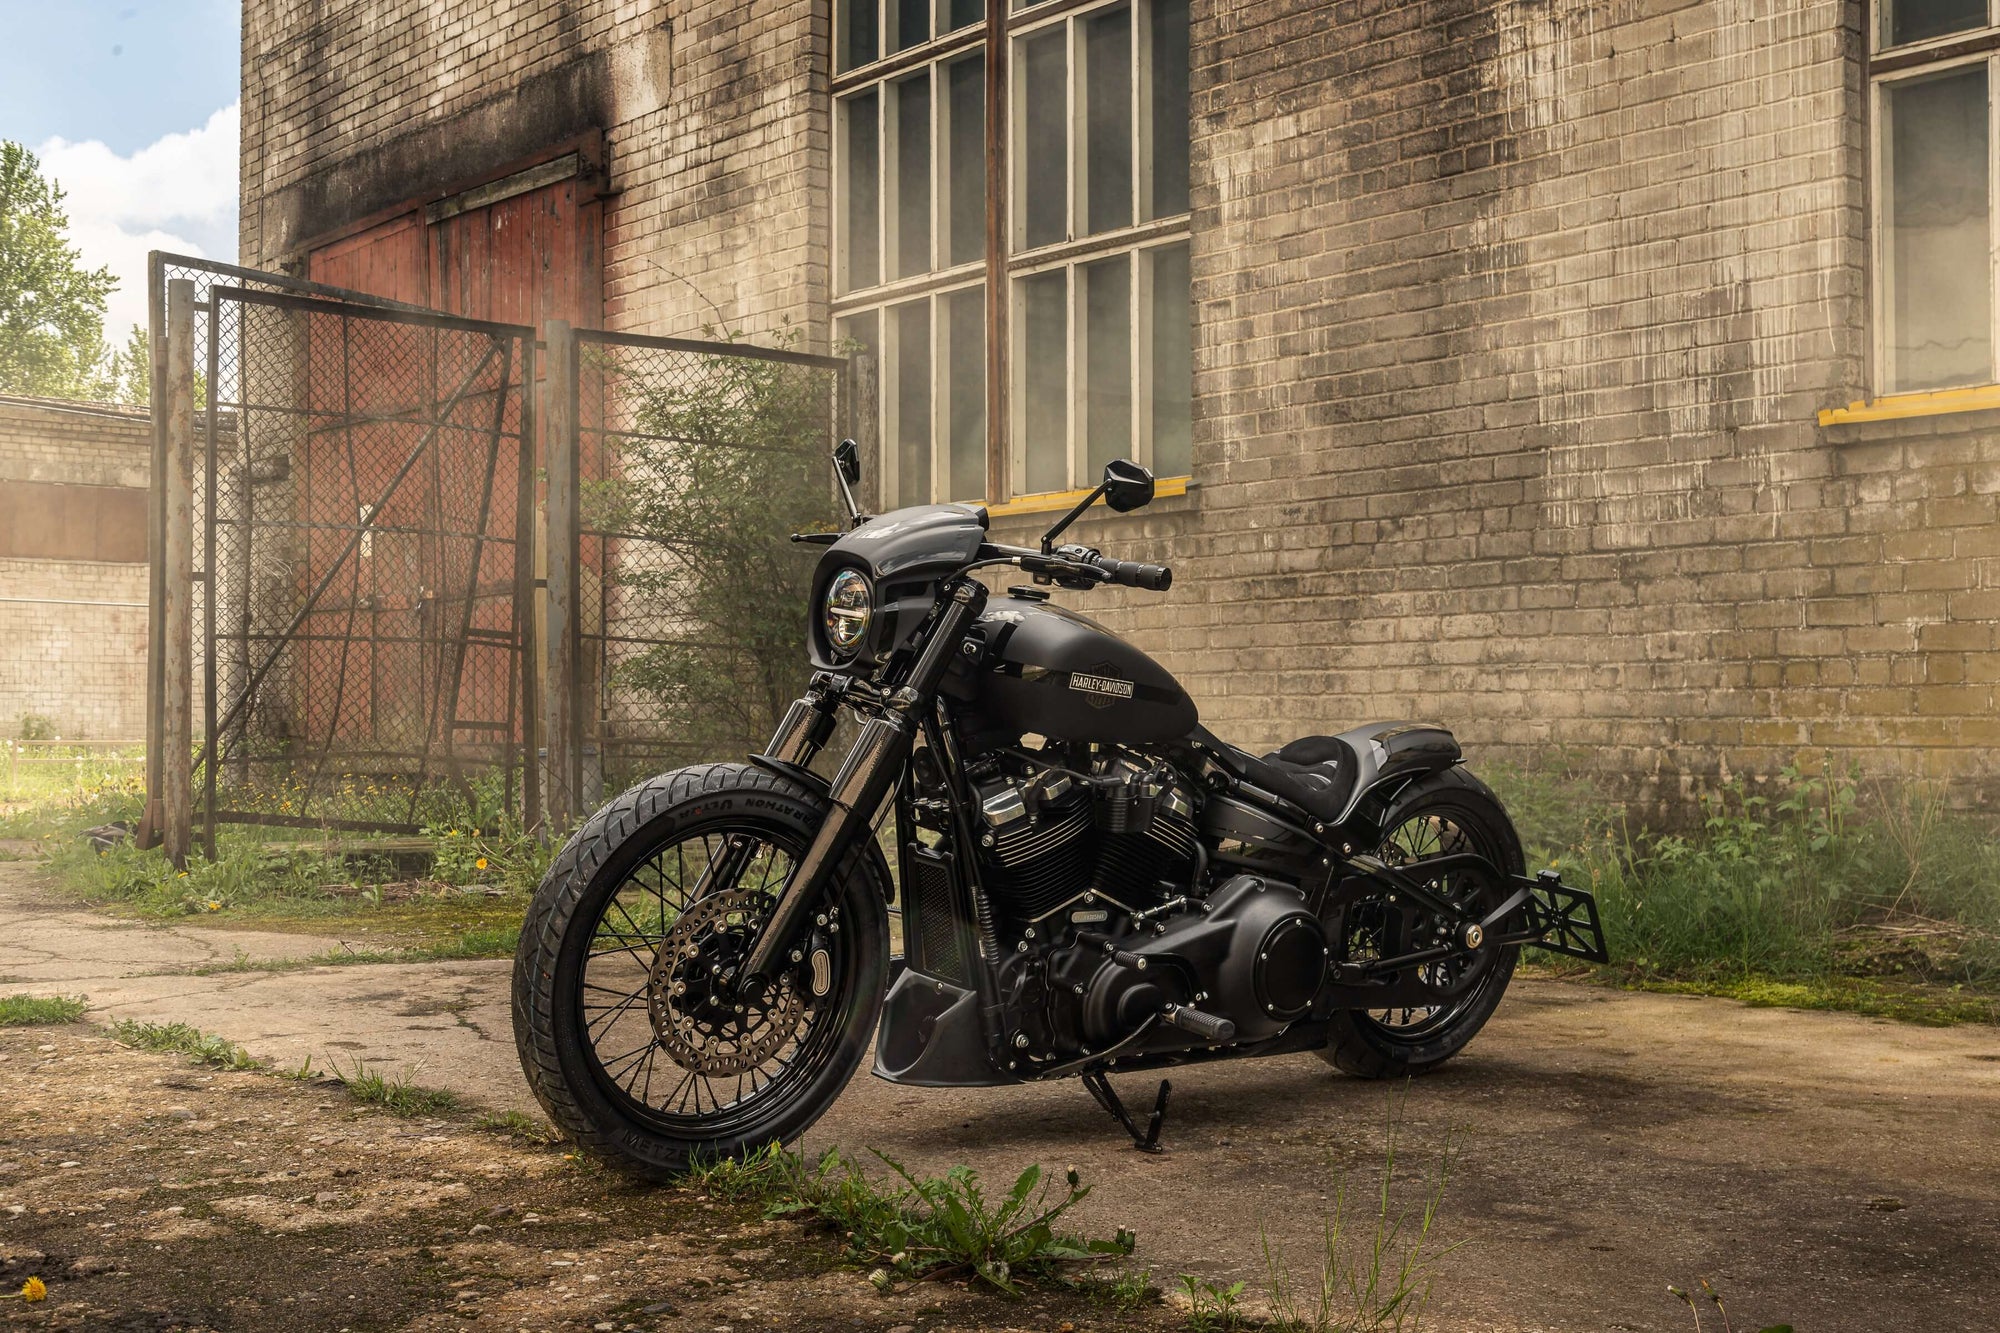 Harley Davidson motorcycle with Killer Custom parts from the side in an abandoned environment